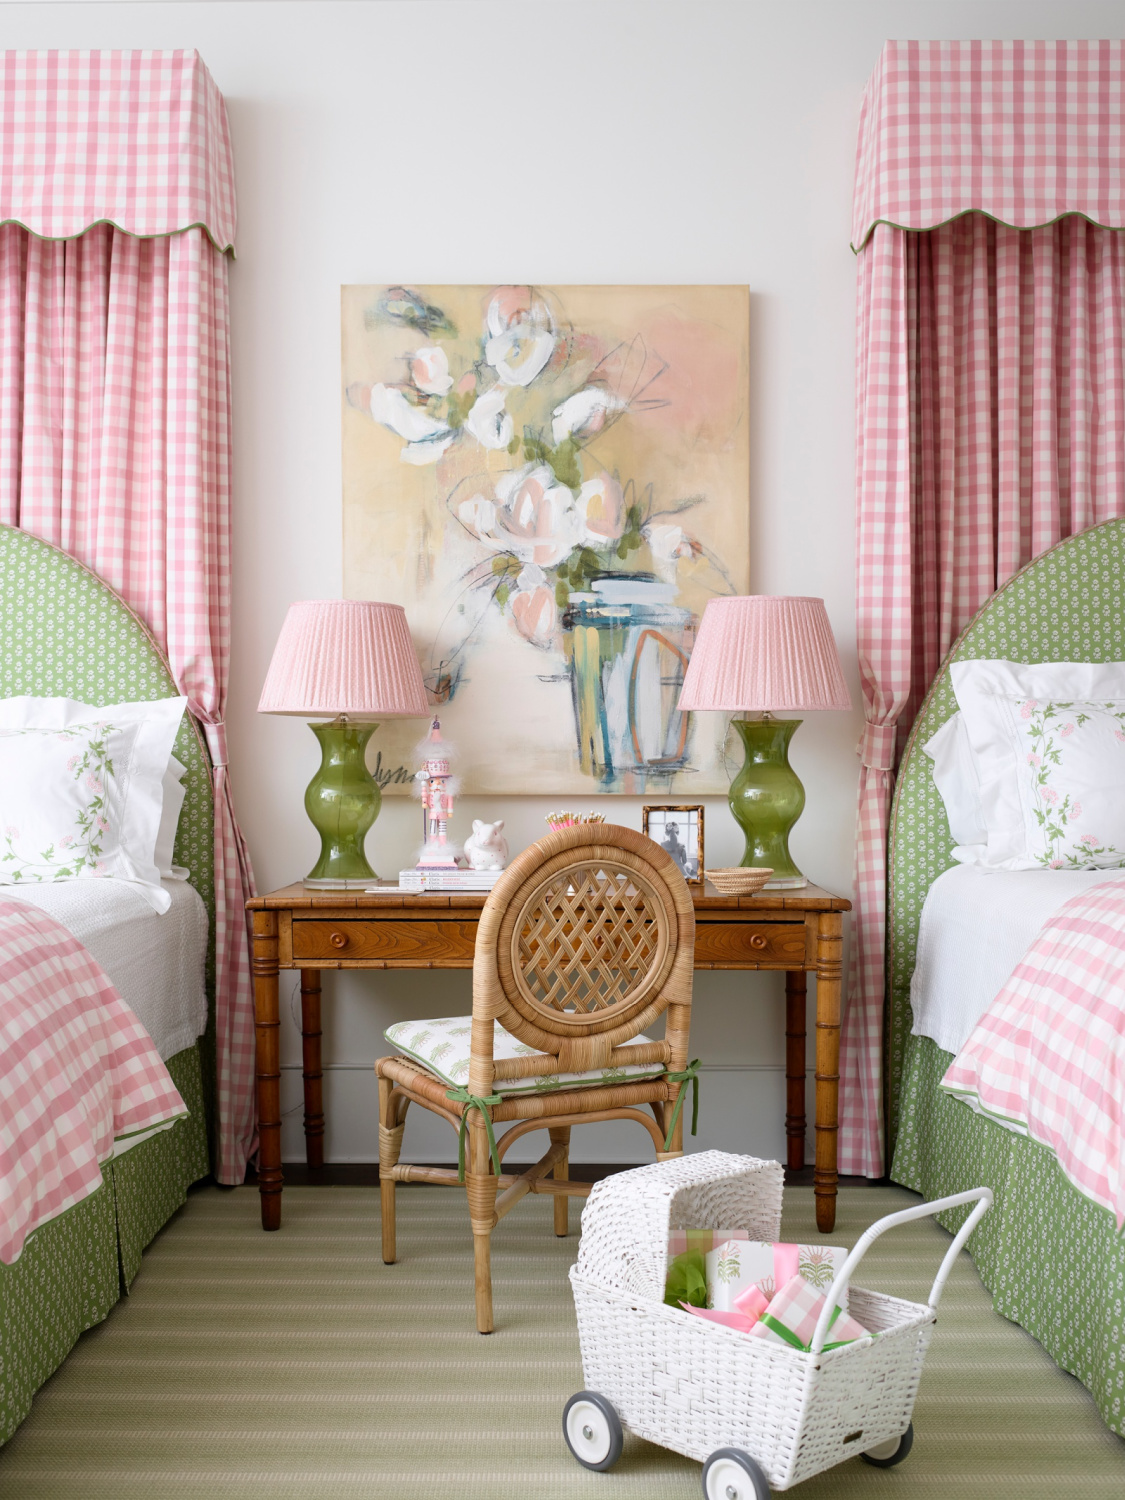 Courtney Giles Interiors bedroom with pink and green in Atlanta Home for Holidays Designer Showhouse 2021. #bedroomdecor #pinkgingham #pinkanadgreen